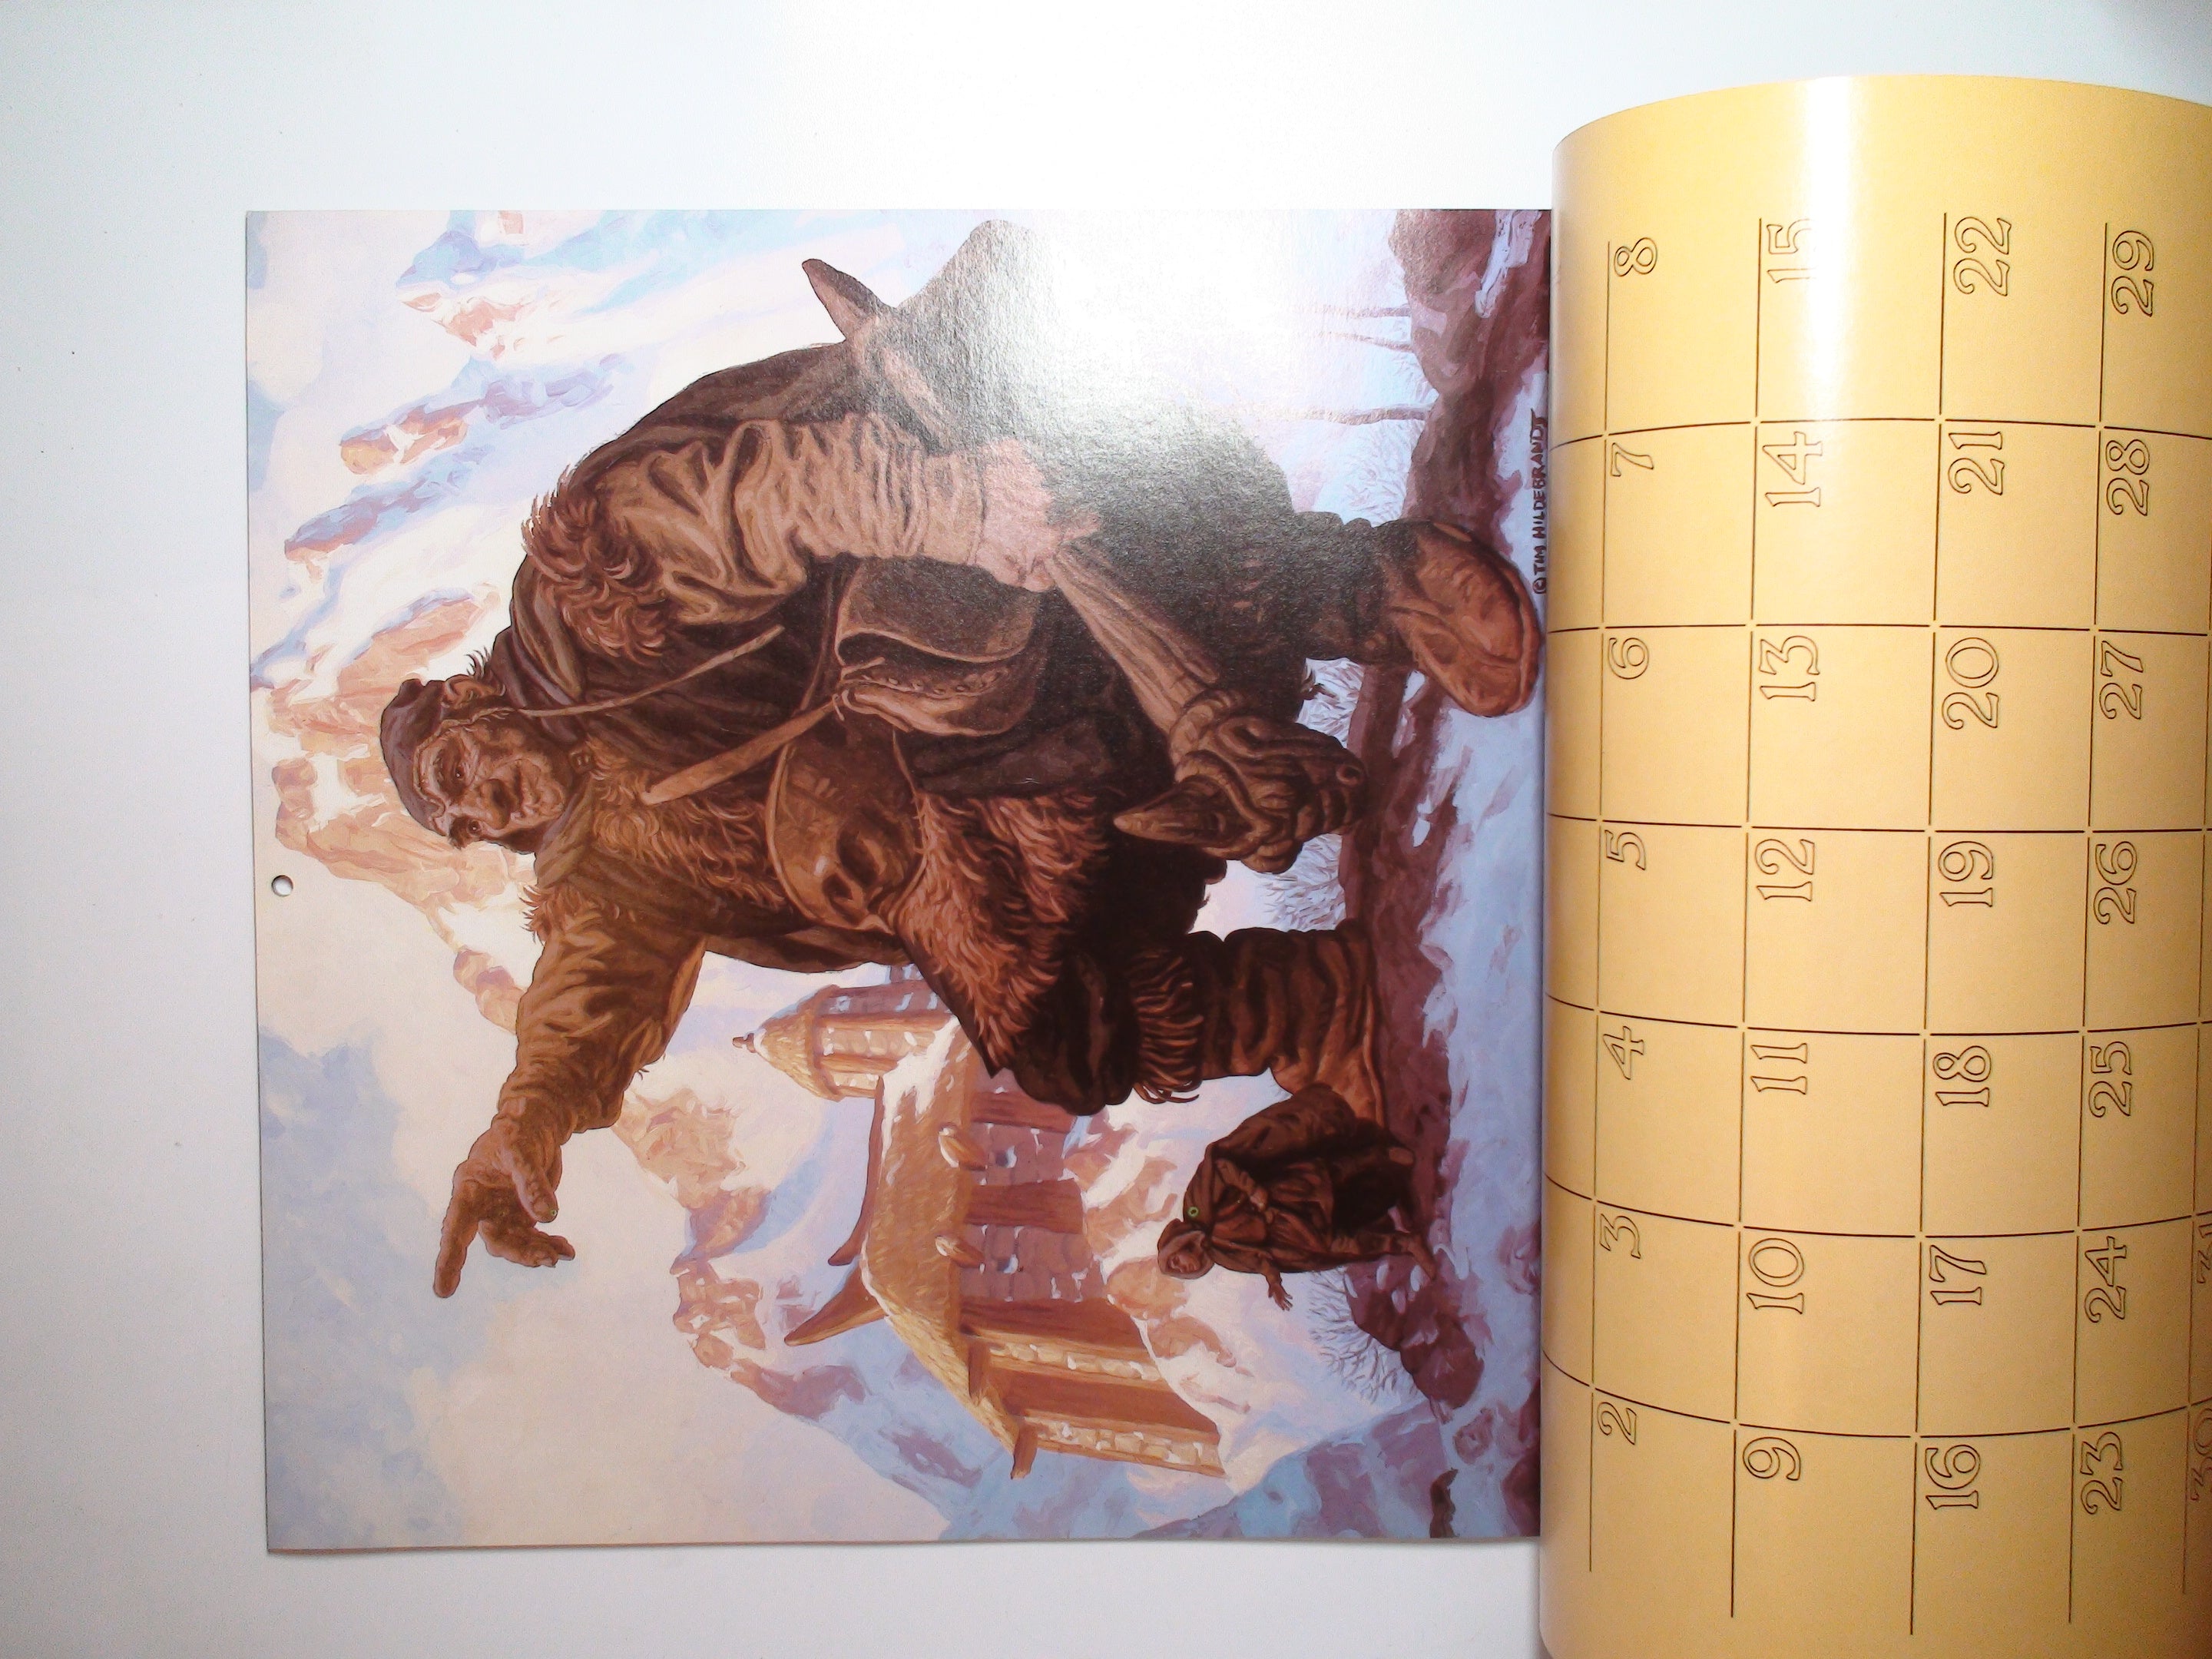 Realms of Wonder, Dungeons & Dragons 1984 Fantasy Calendar, Collectible